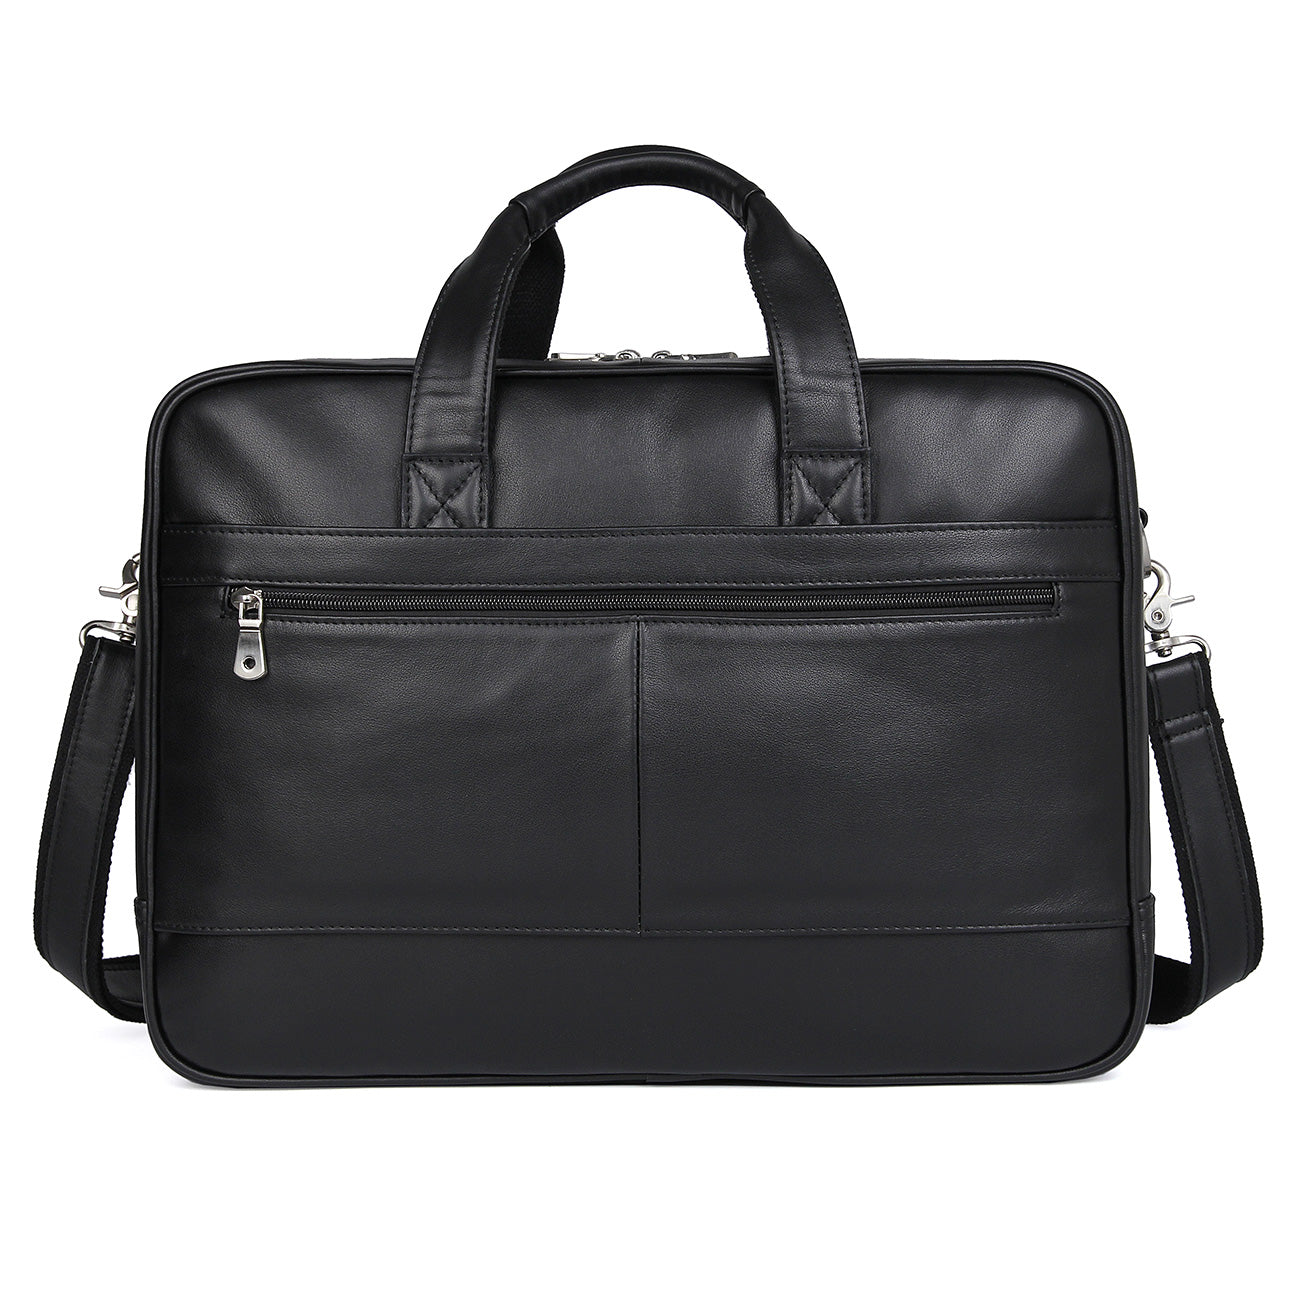 Polare 17" Real Italian Leather Laptop Case Professional Briefcase Business Bag (Black, Back)